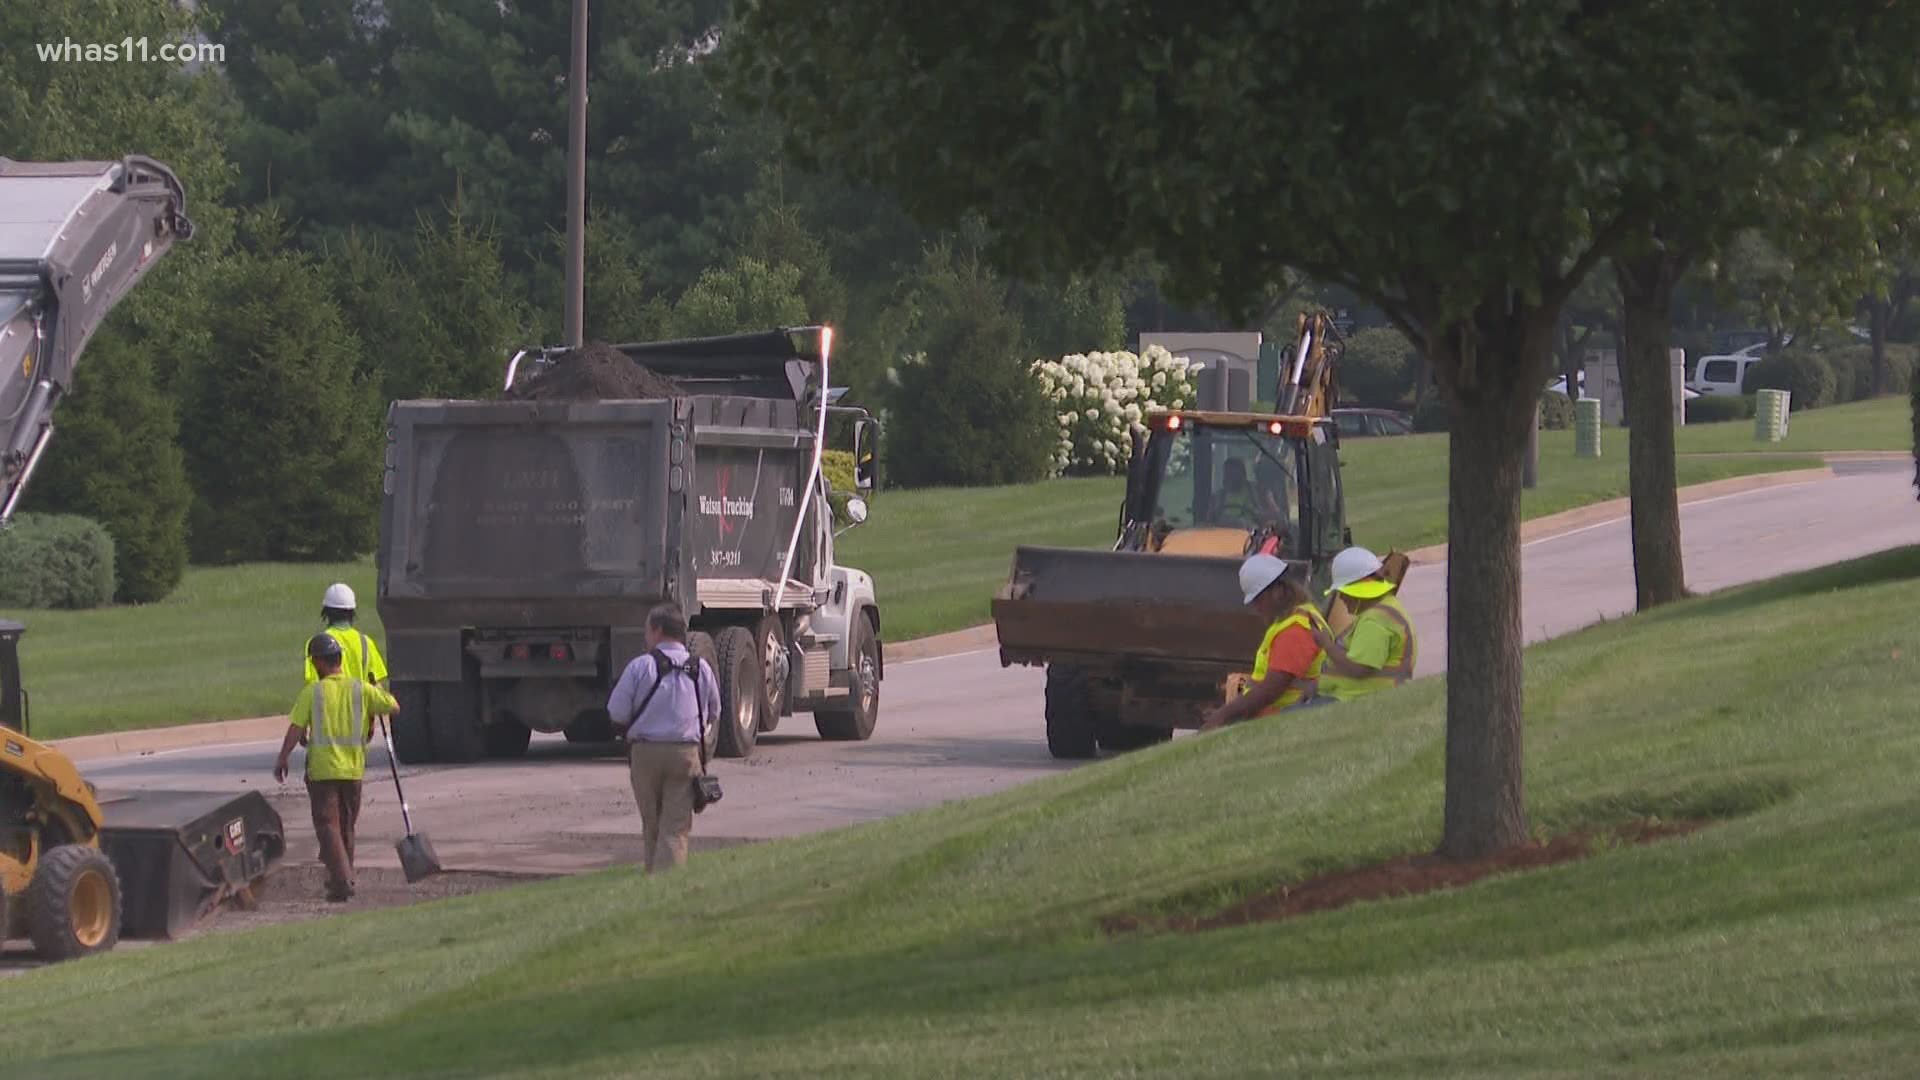 City officials gathered Tuesday to discuss the $55 million budget investment for paving and sidewalk repair in Louisville this fiscal year.